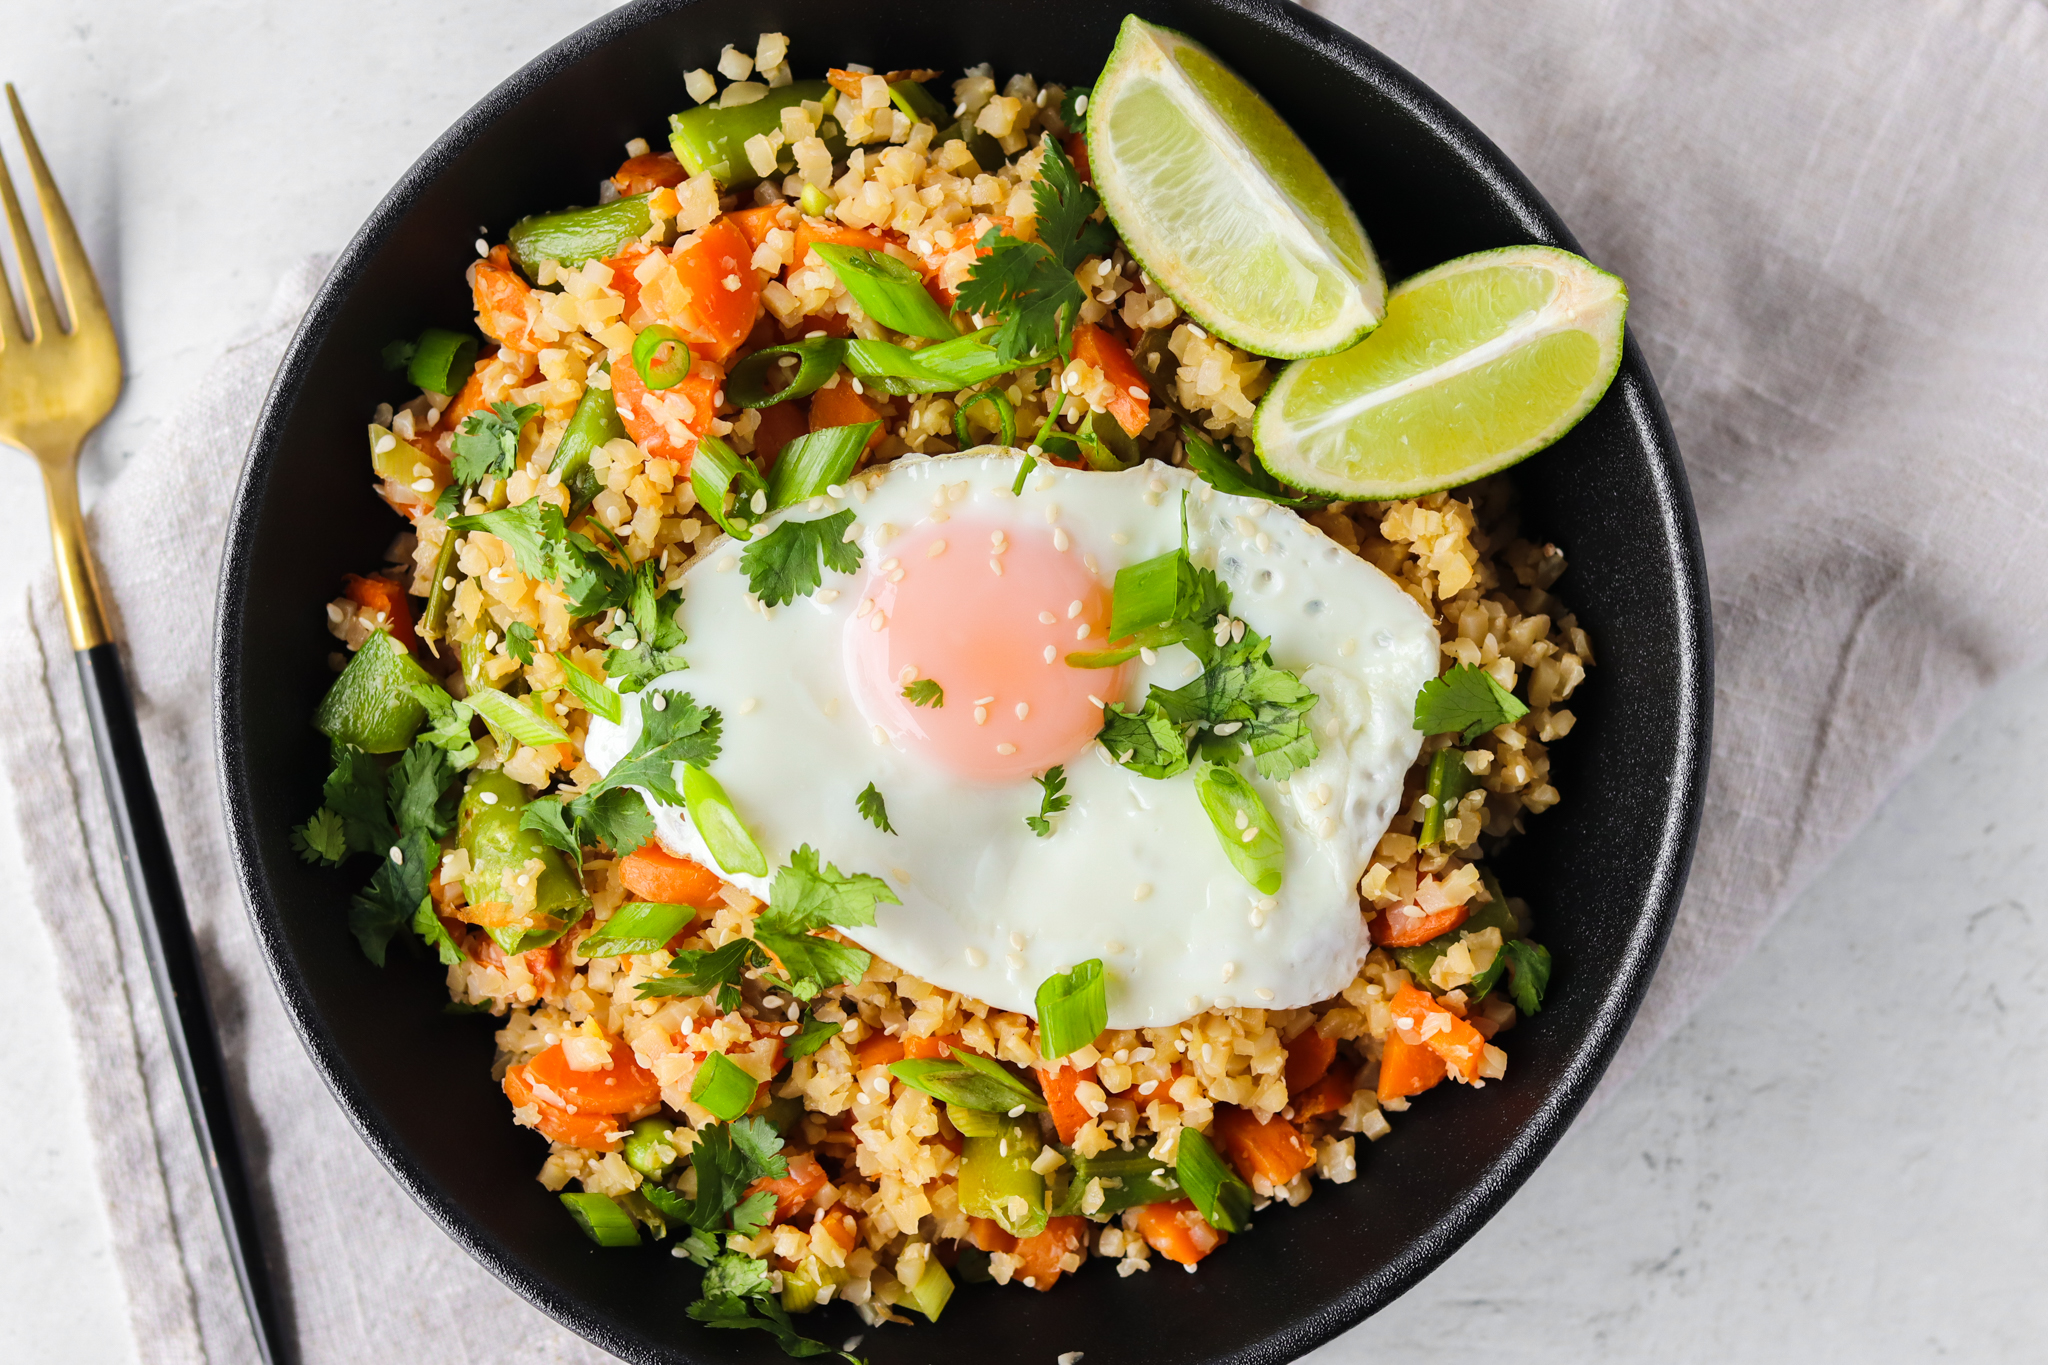 high-protein breakfast recipes for weight loss cauliflower rice